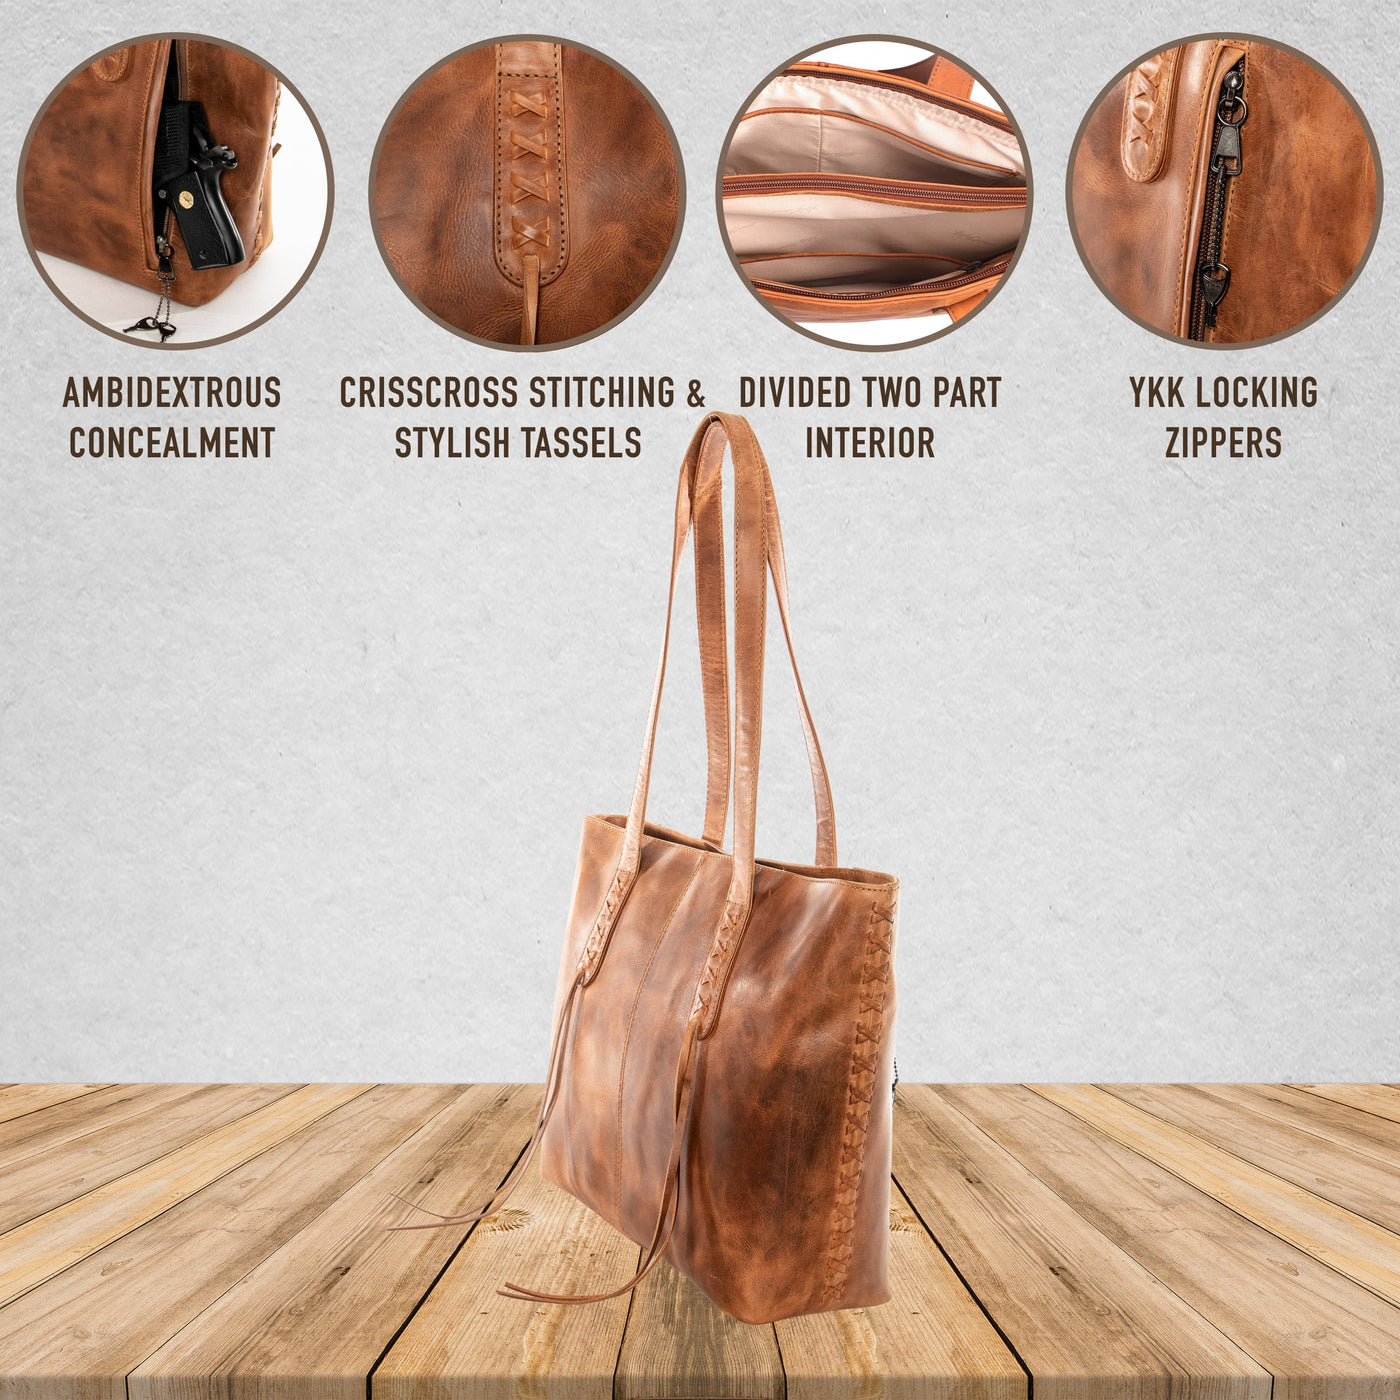 Concealed Carry Bag for Women - Brooklyn Tote by Lady Conceal Mahogany